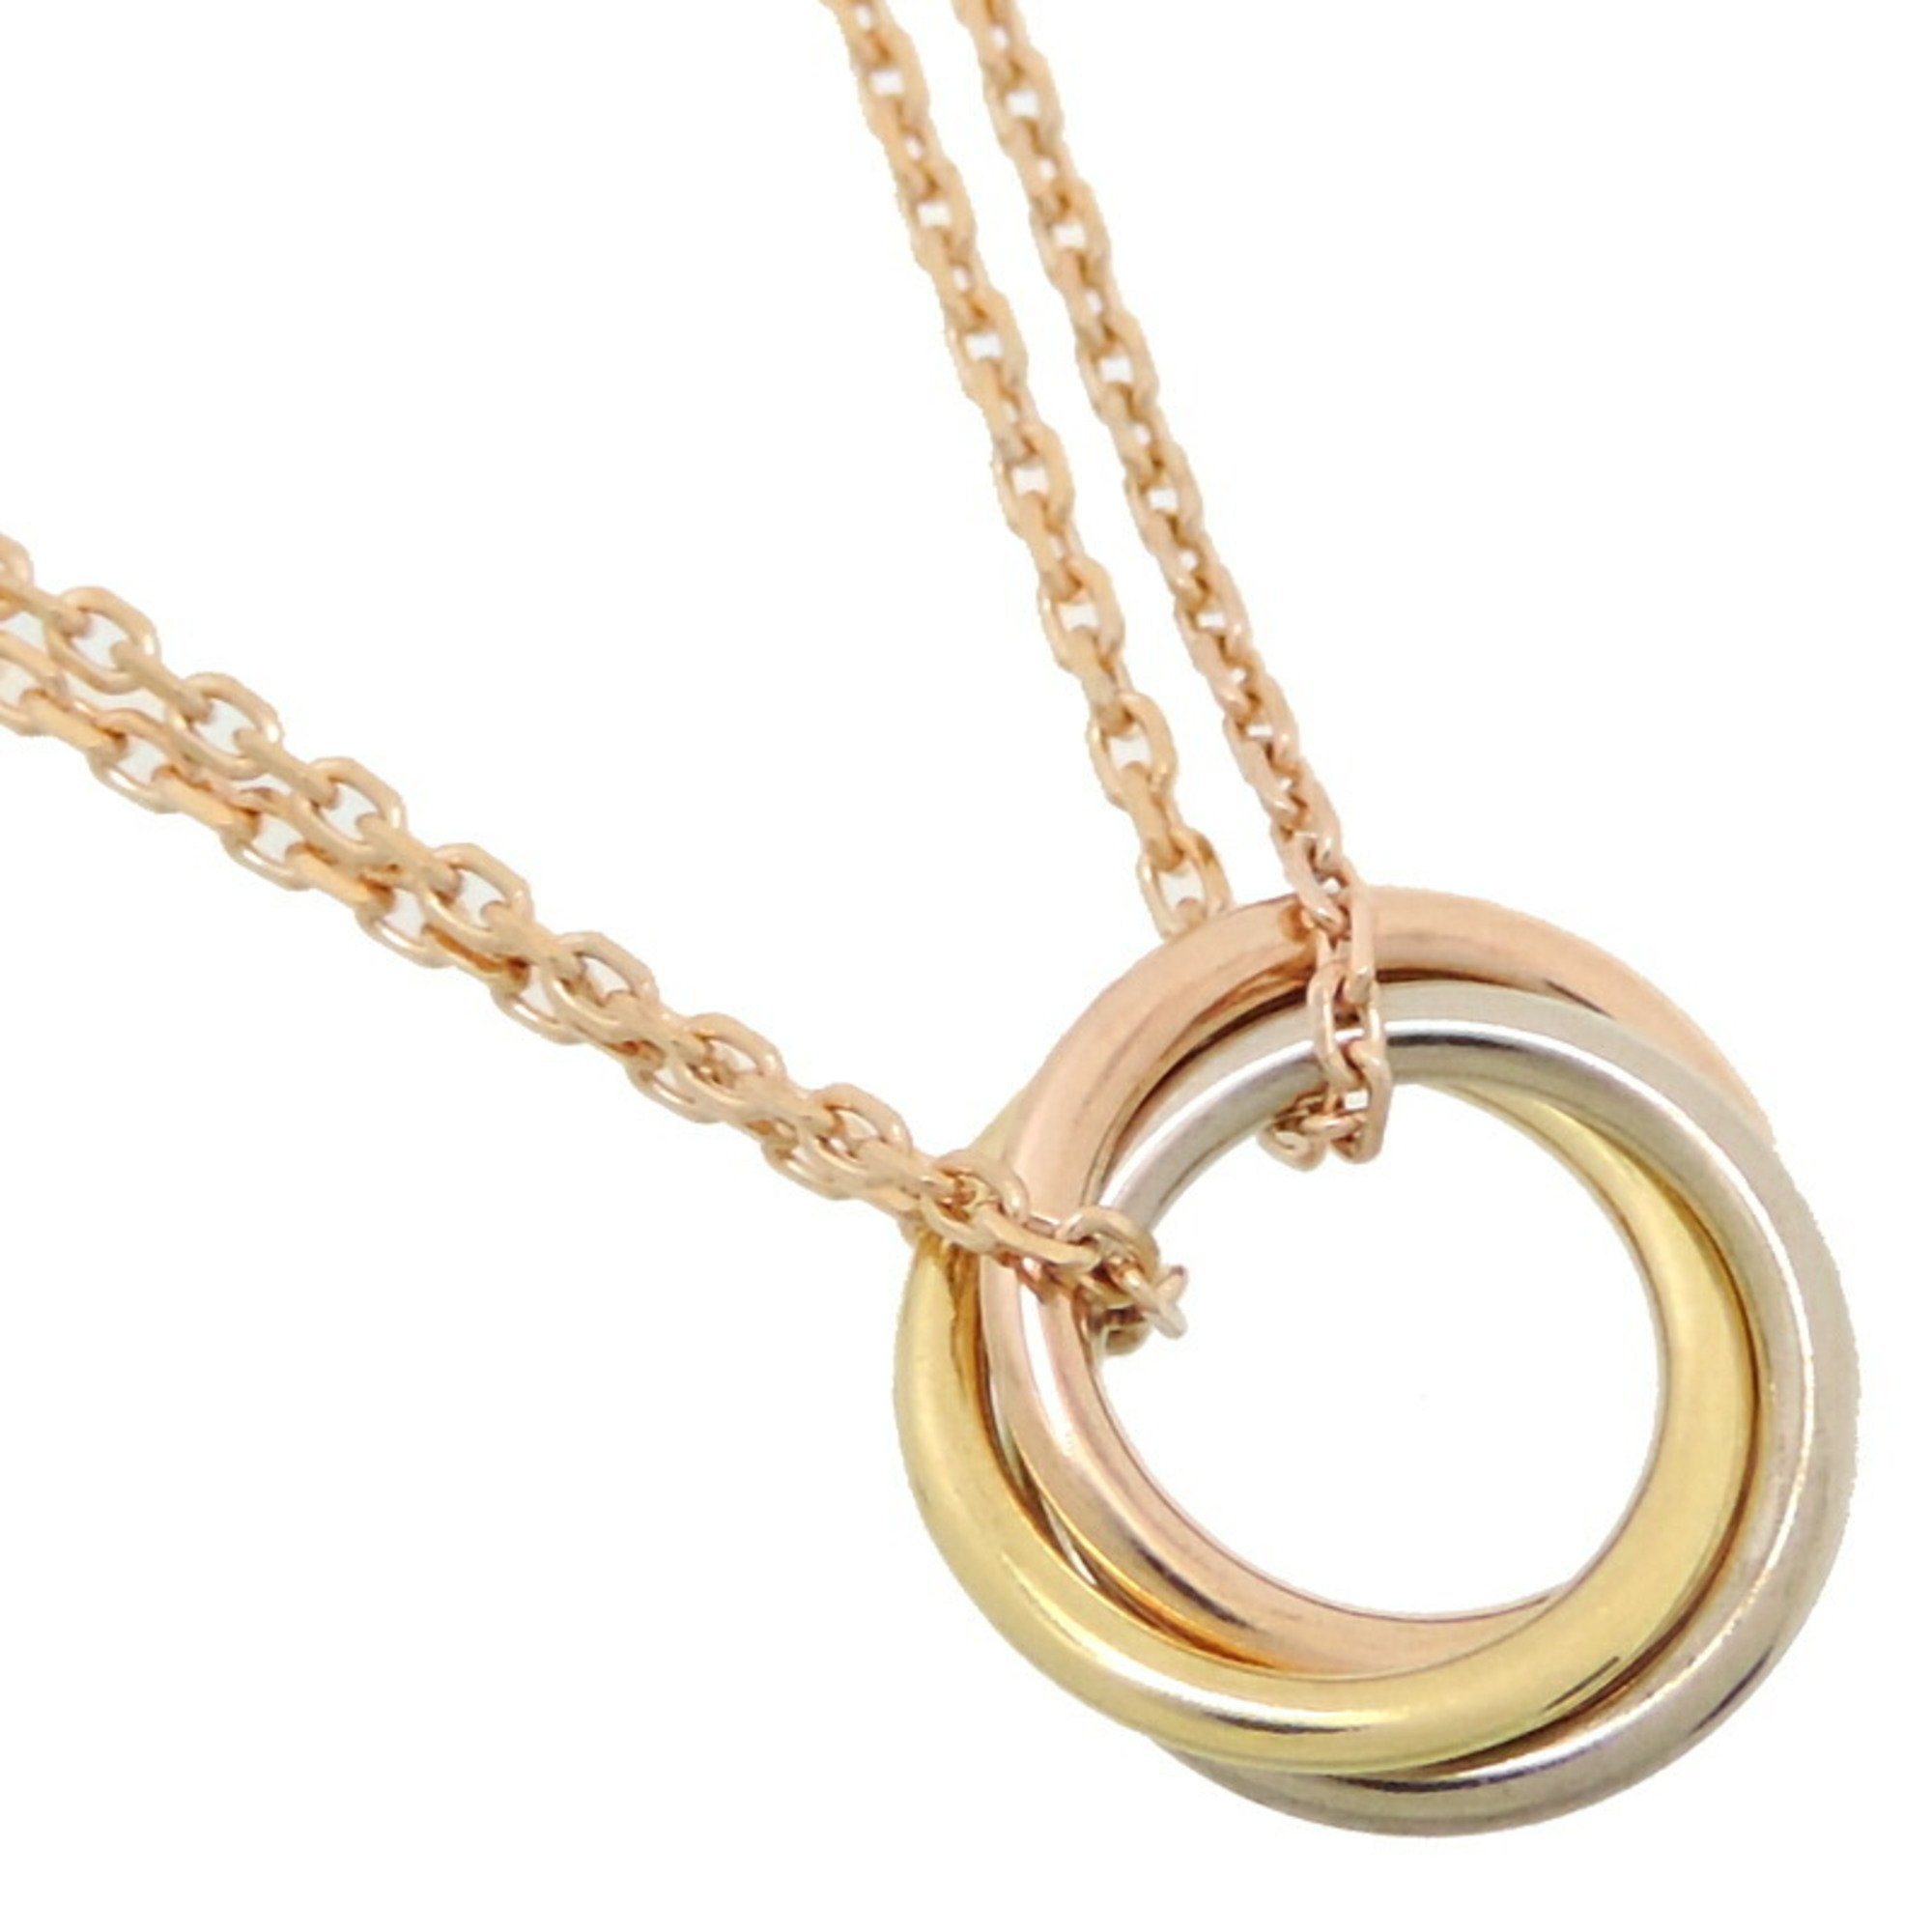 Cartier Sweet Trinity Women's Necklace B7218200 750 Yellow Gold